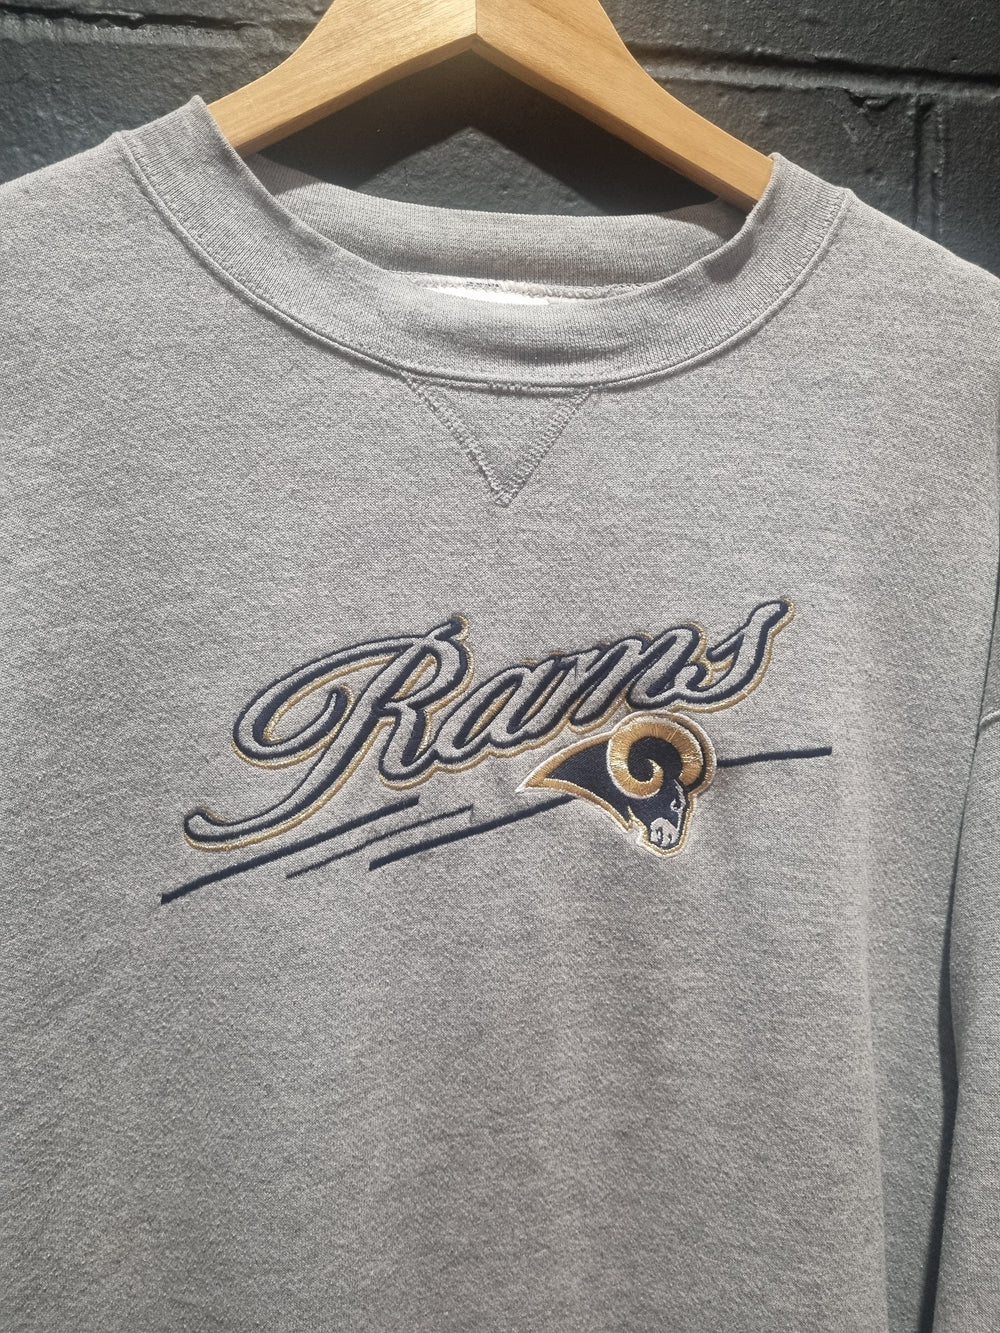 LA Rams Made in USA XL